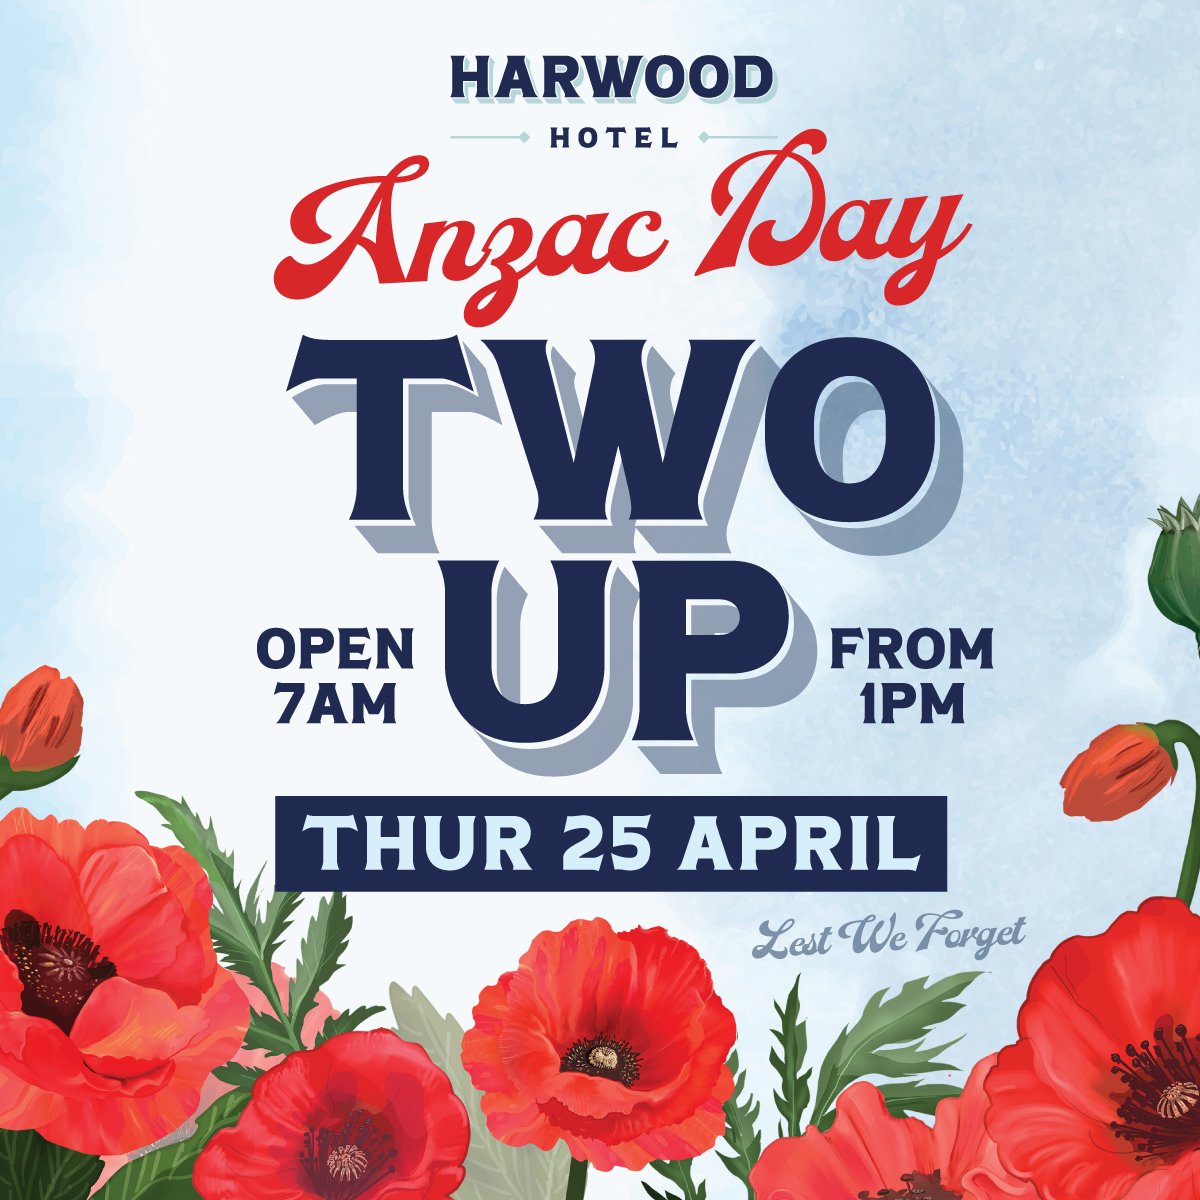 Today, we commemorate the ANZAC spirit at Harwood Hotel. 

Doors open at 7am, with the traditional game of 2-Up beginning at 1pm. 

Take advantage of our courtesy bus for a safe trip home. 

Lest we forget.

#HarwoodHotel #VisitNSW #CountryPub